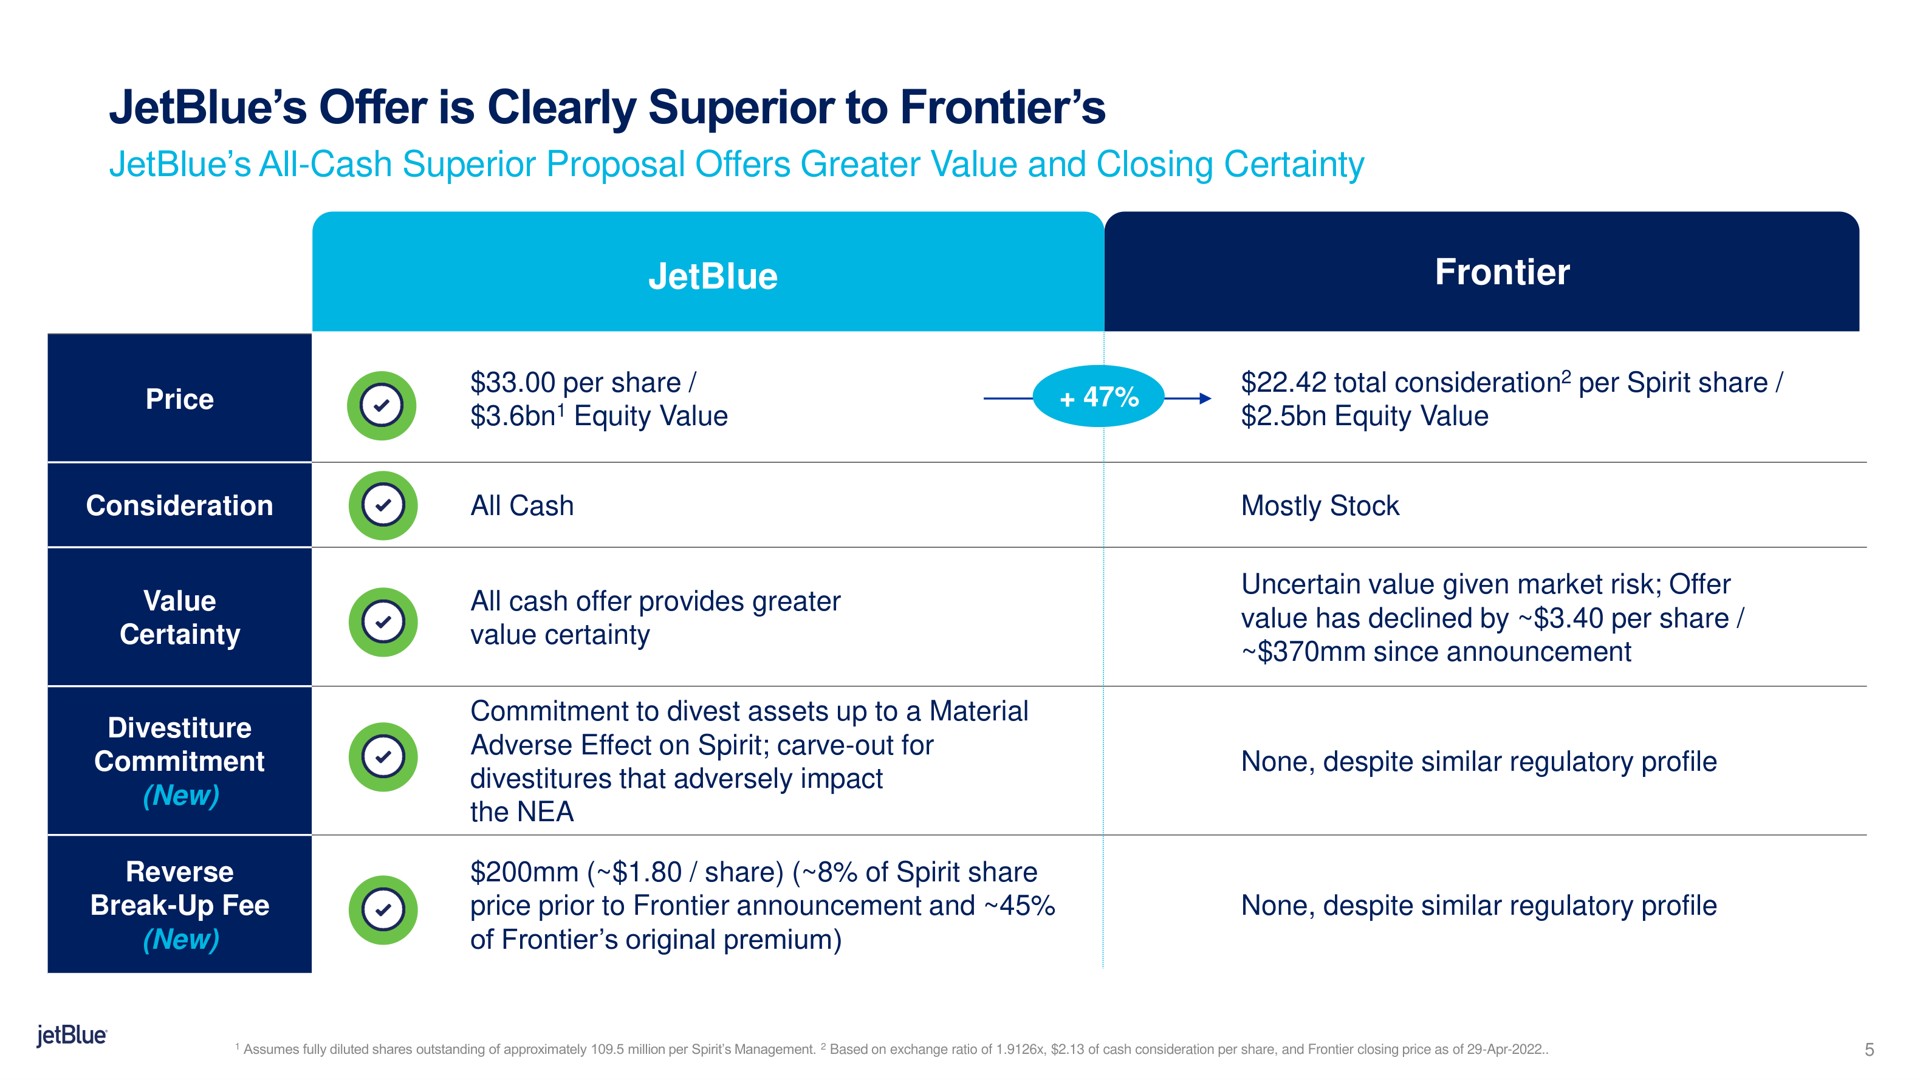 offer is clearly superior to frontier | jetBlue